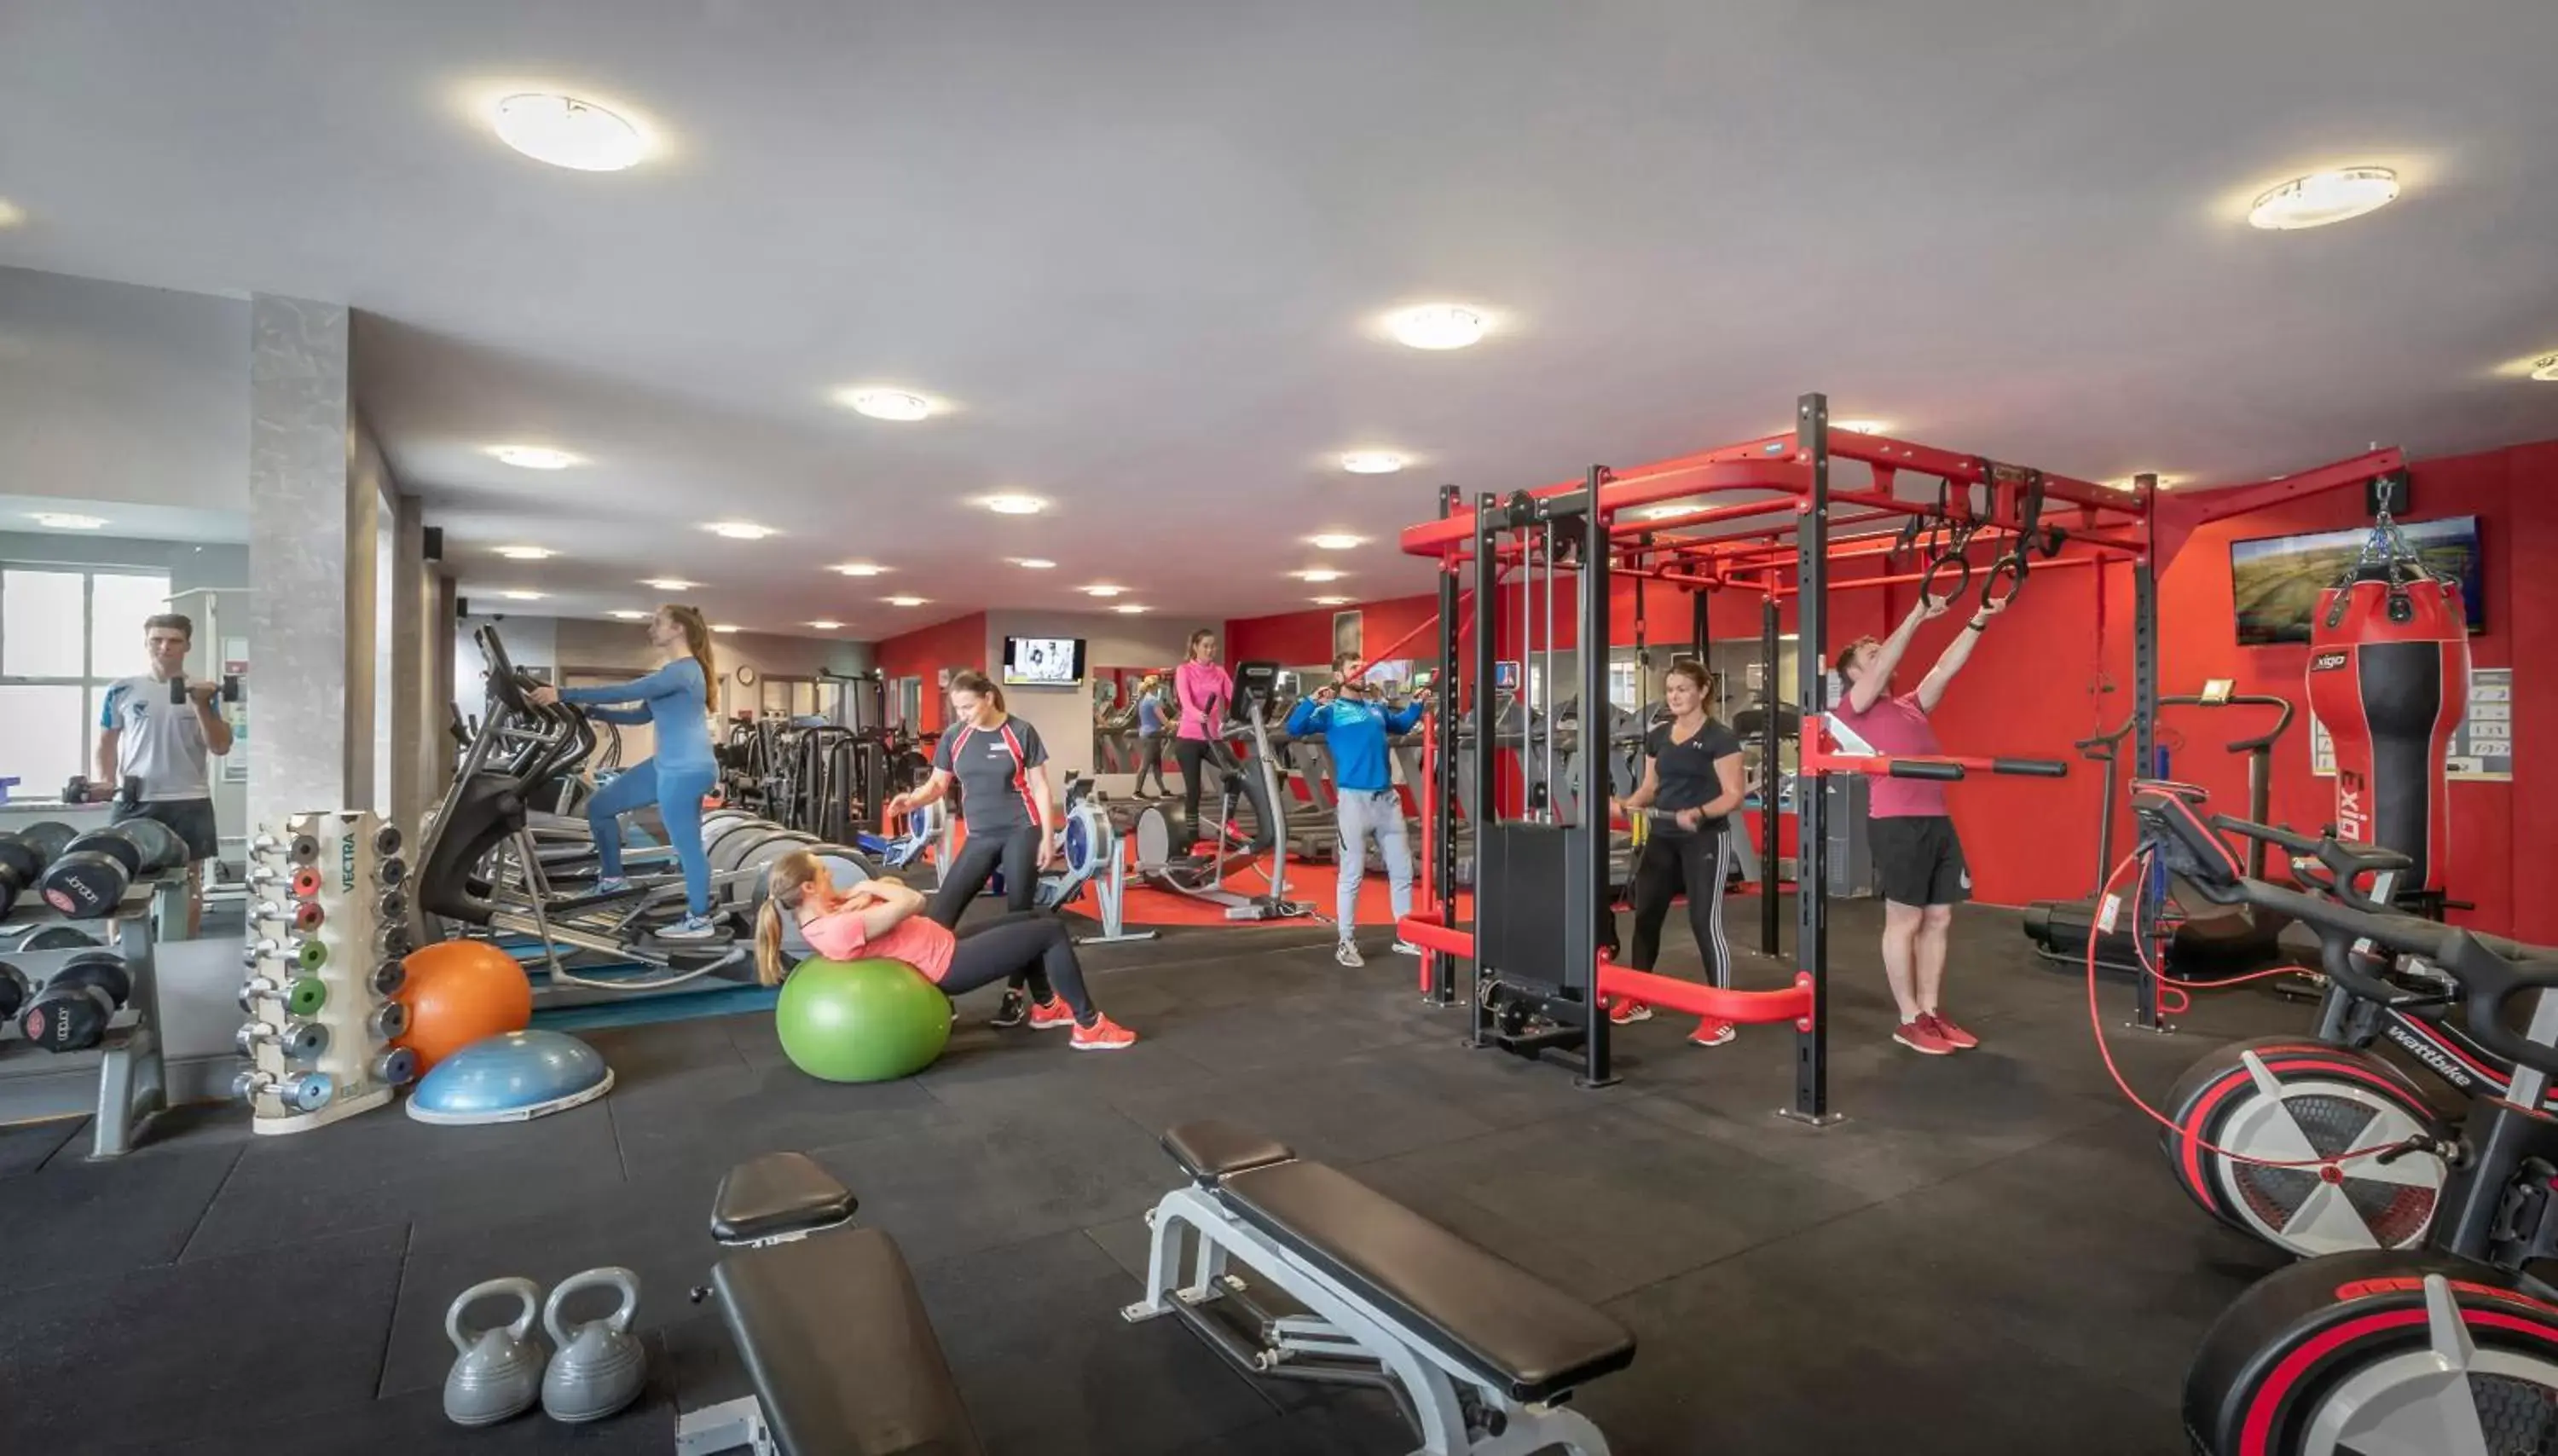 Fitness centre/facilities, Fitness Center/Facilities in Maldron Hotel & Leisure Centre, Oranmore Galway